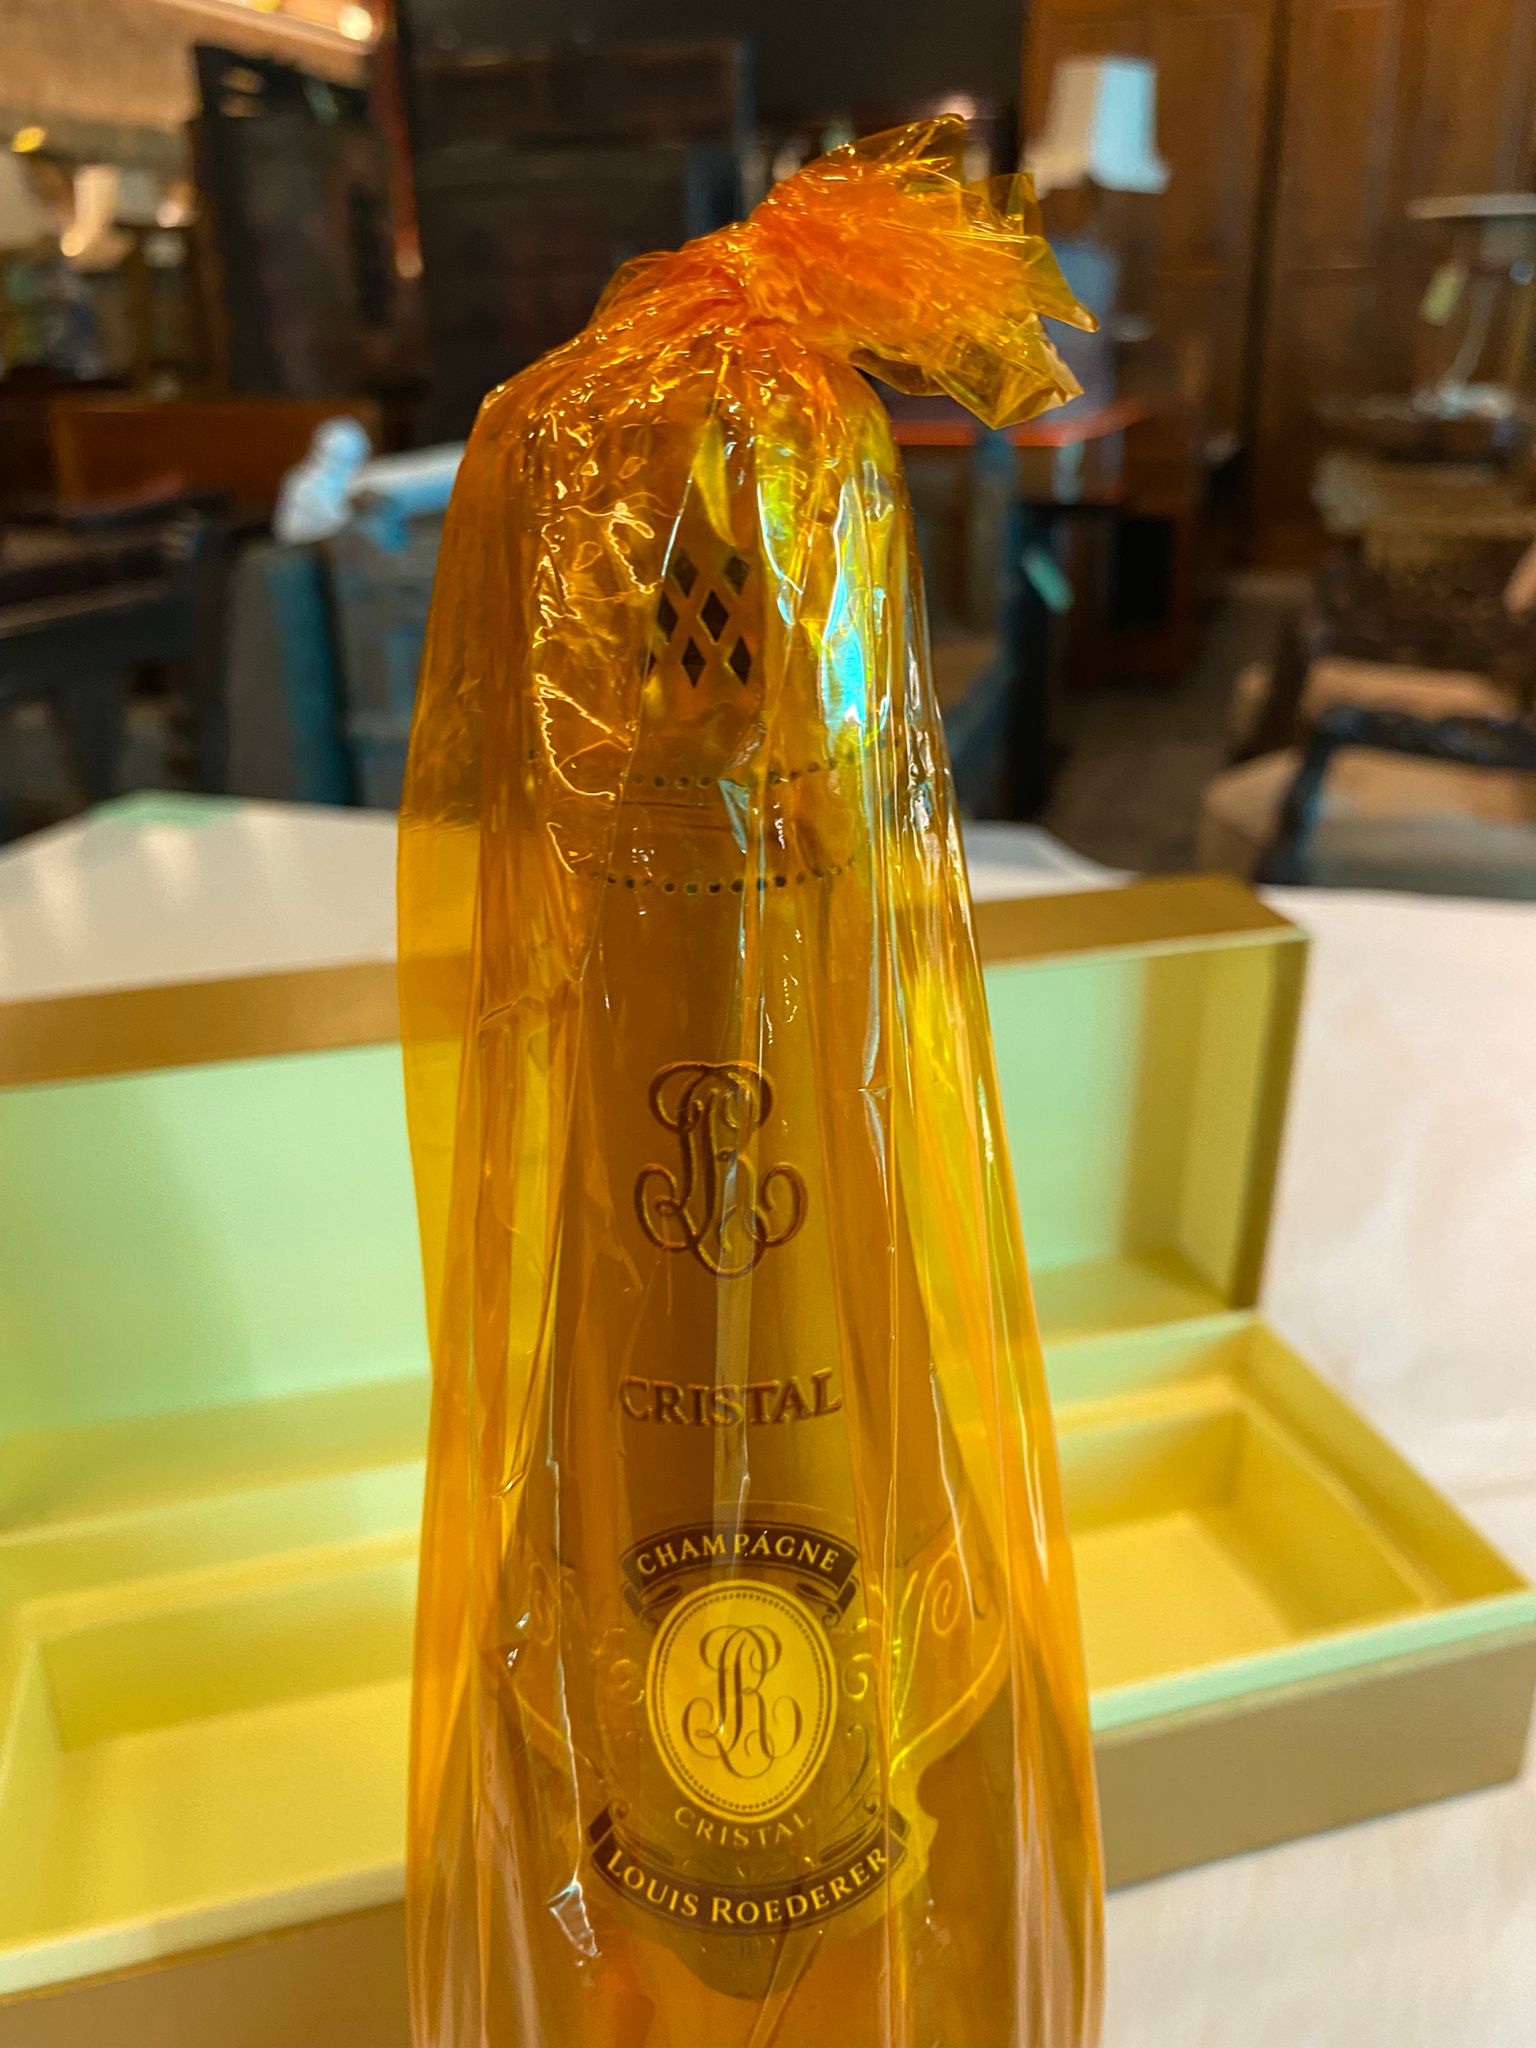 LOUIS ROEDERER CRISTAL CHAMPAGNE 2004 - Image 5 of 6